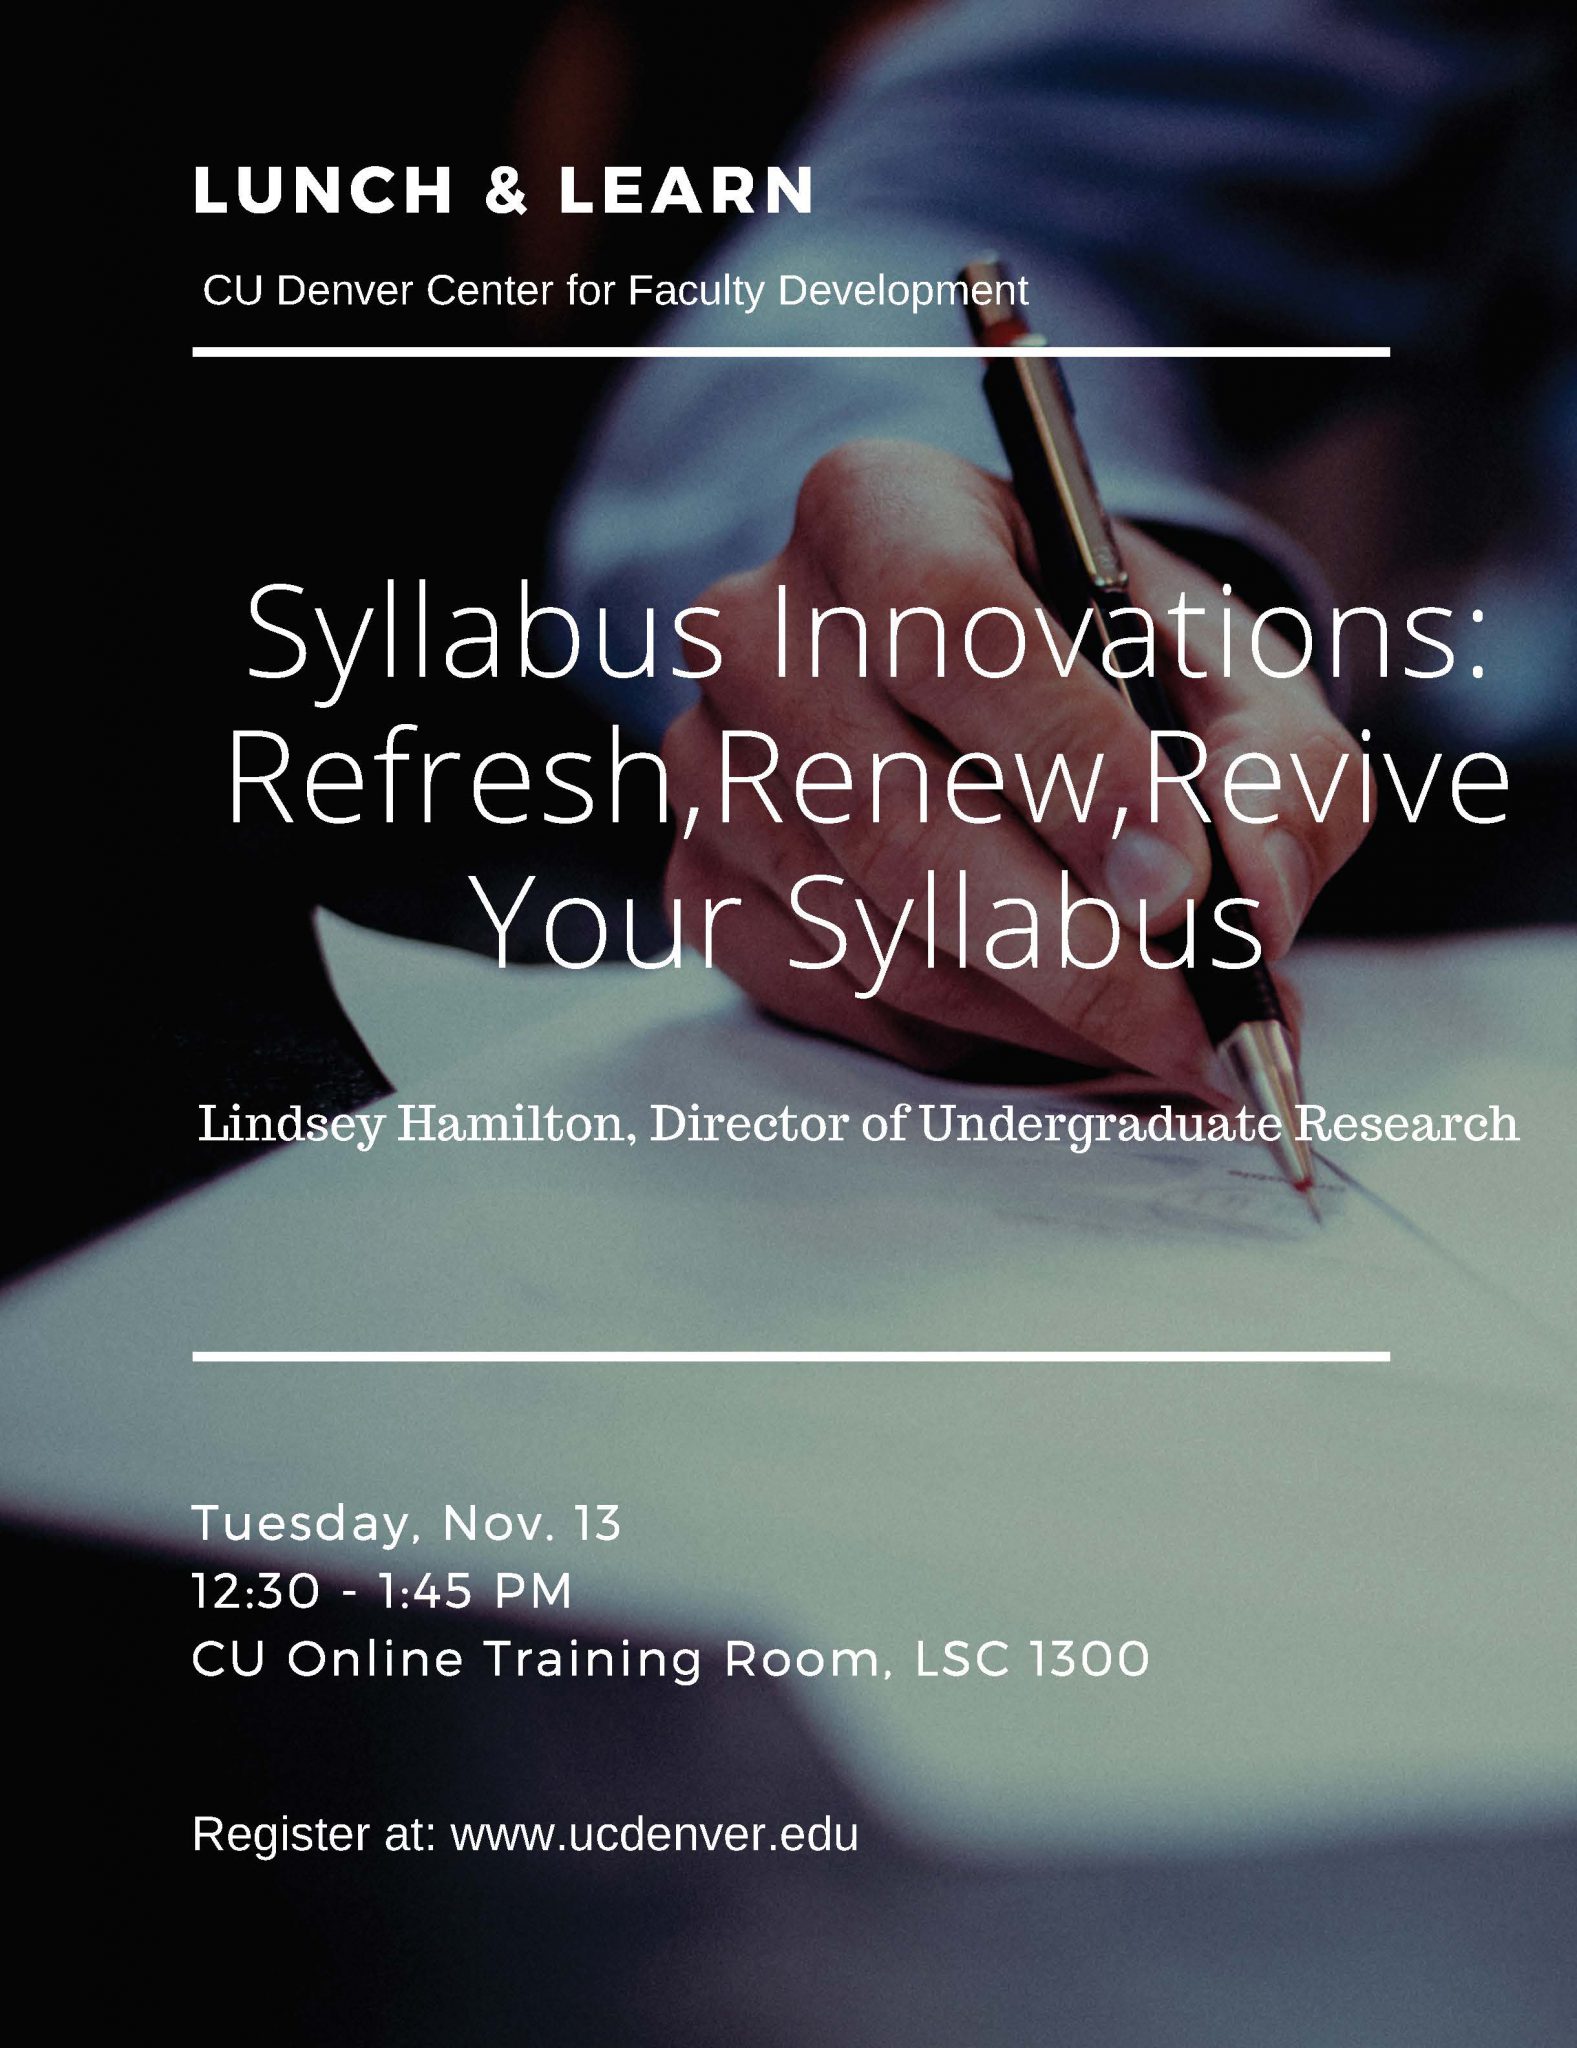 Lunch & Learn: Syllabus Innovations: Refresh,Renew,Revive Your Syllabus event flyer